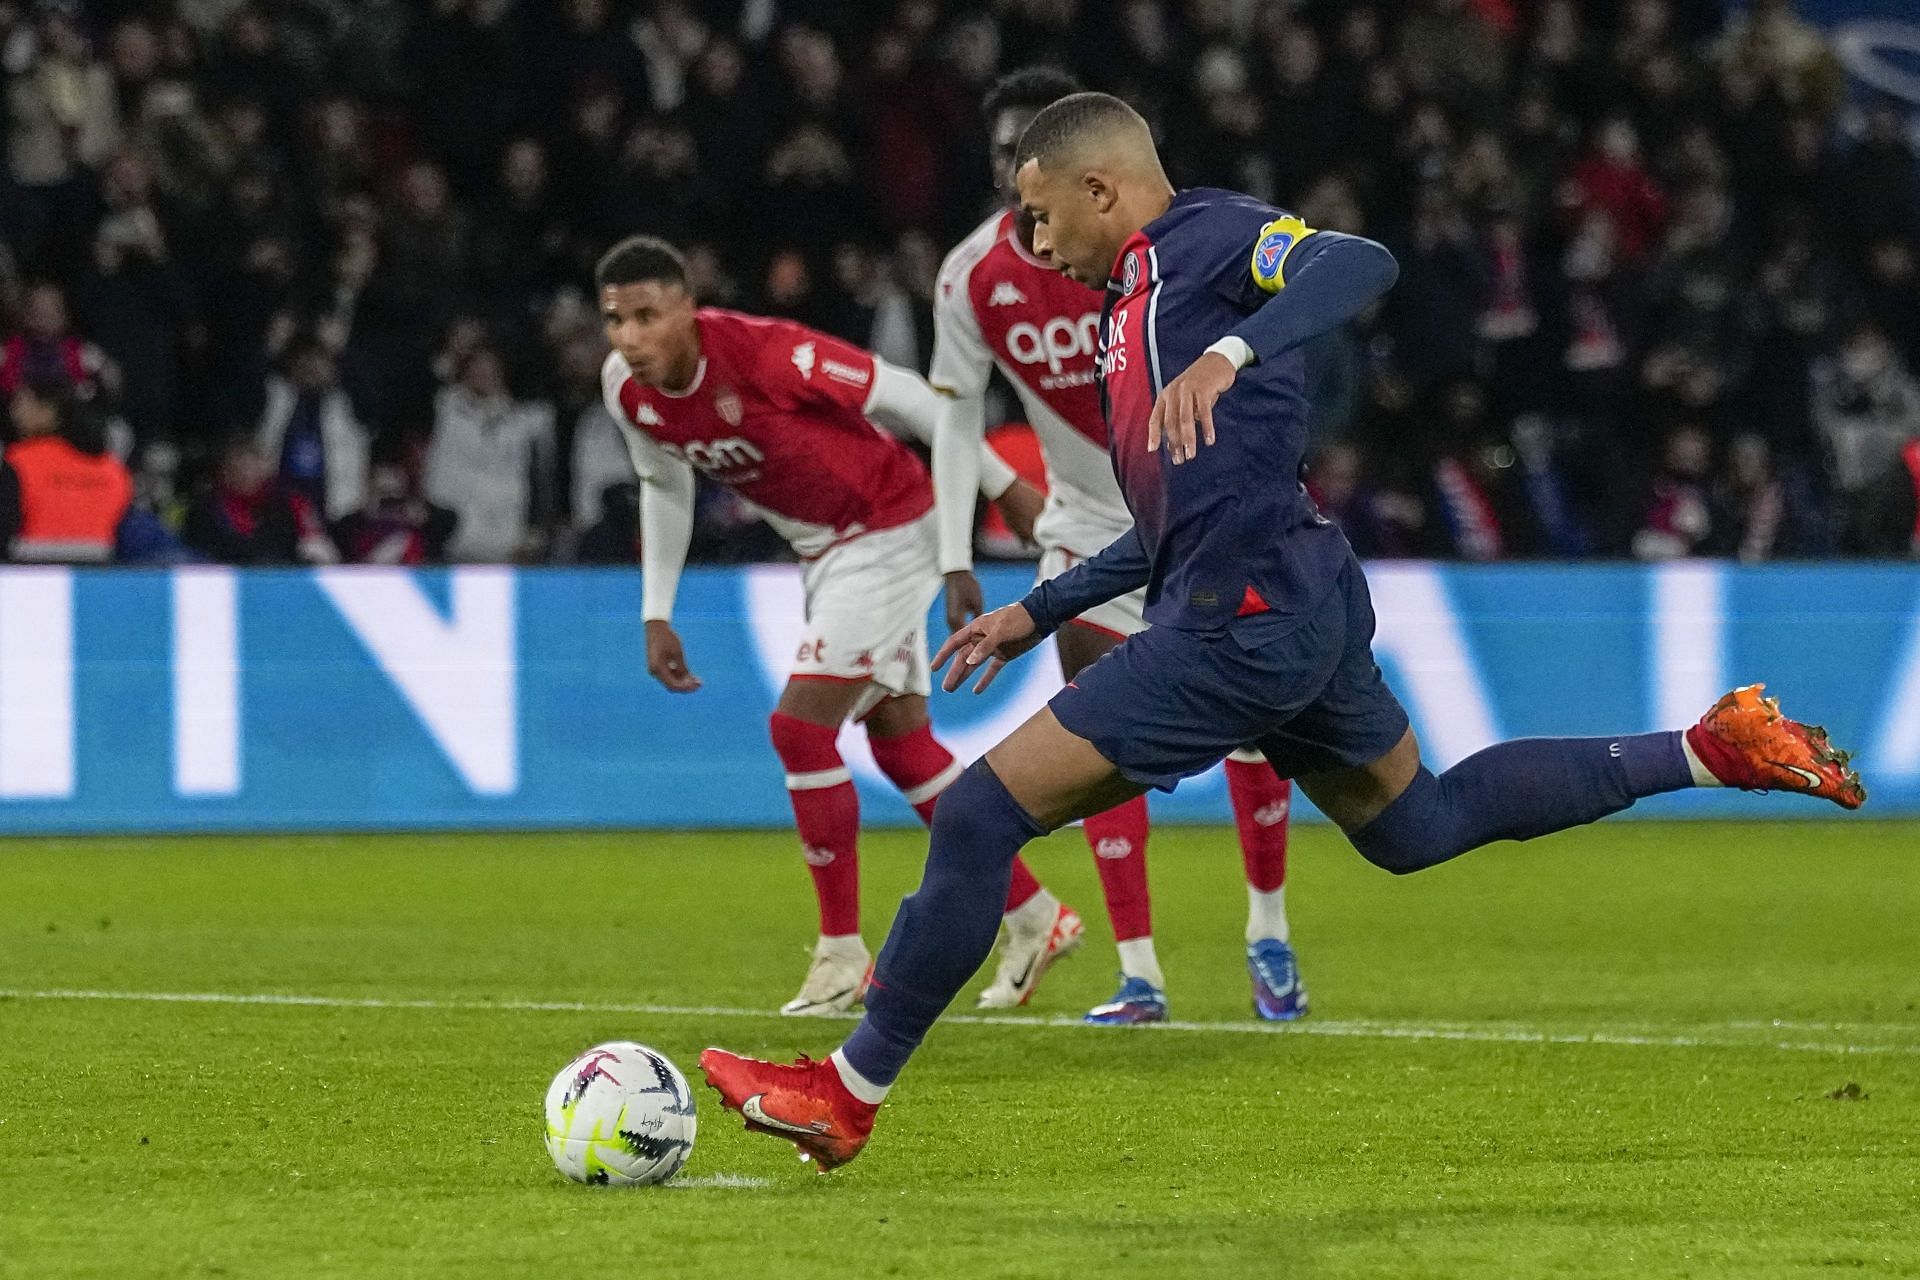 Kylian Mbappé: What next for French superstar as questions over his PSG  future rumble on?